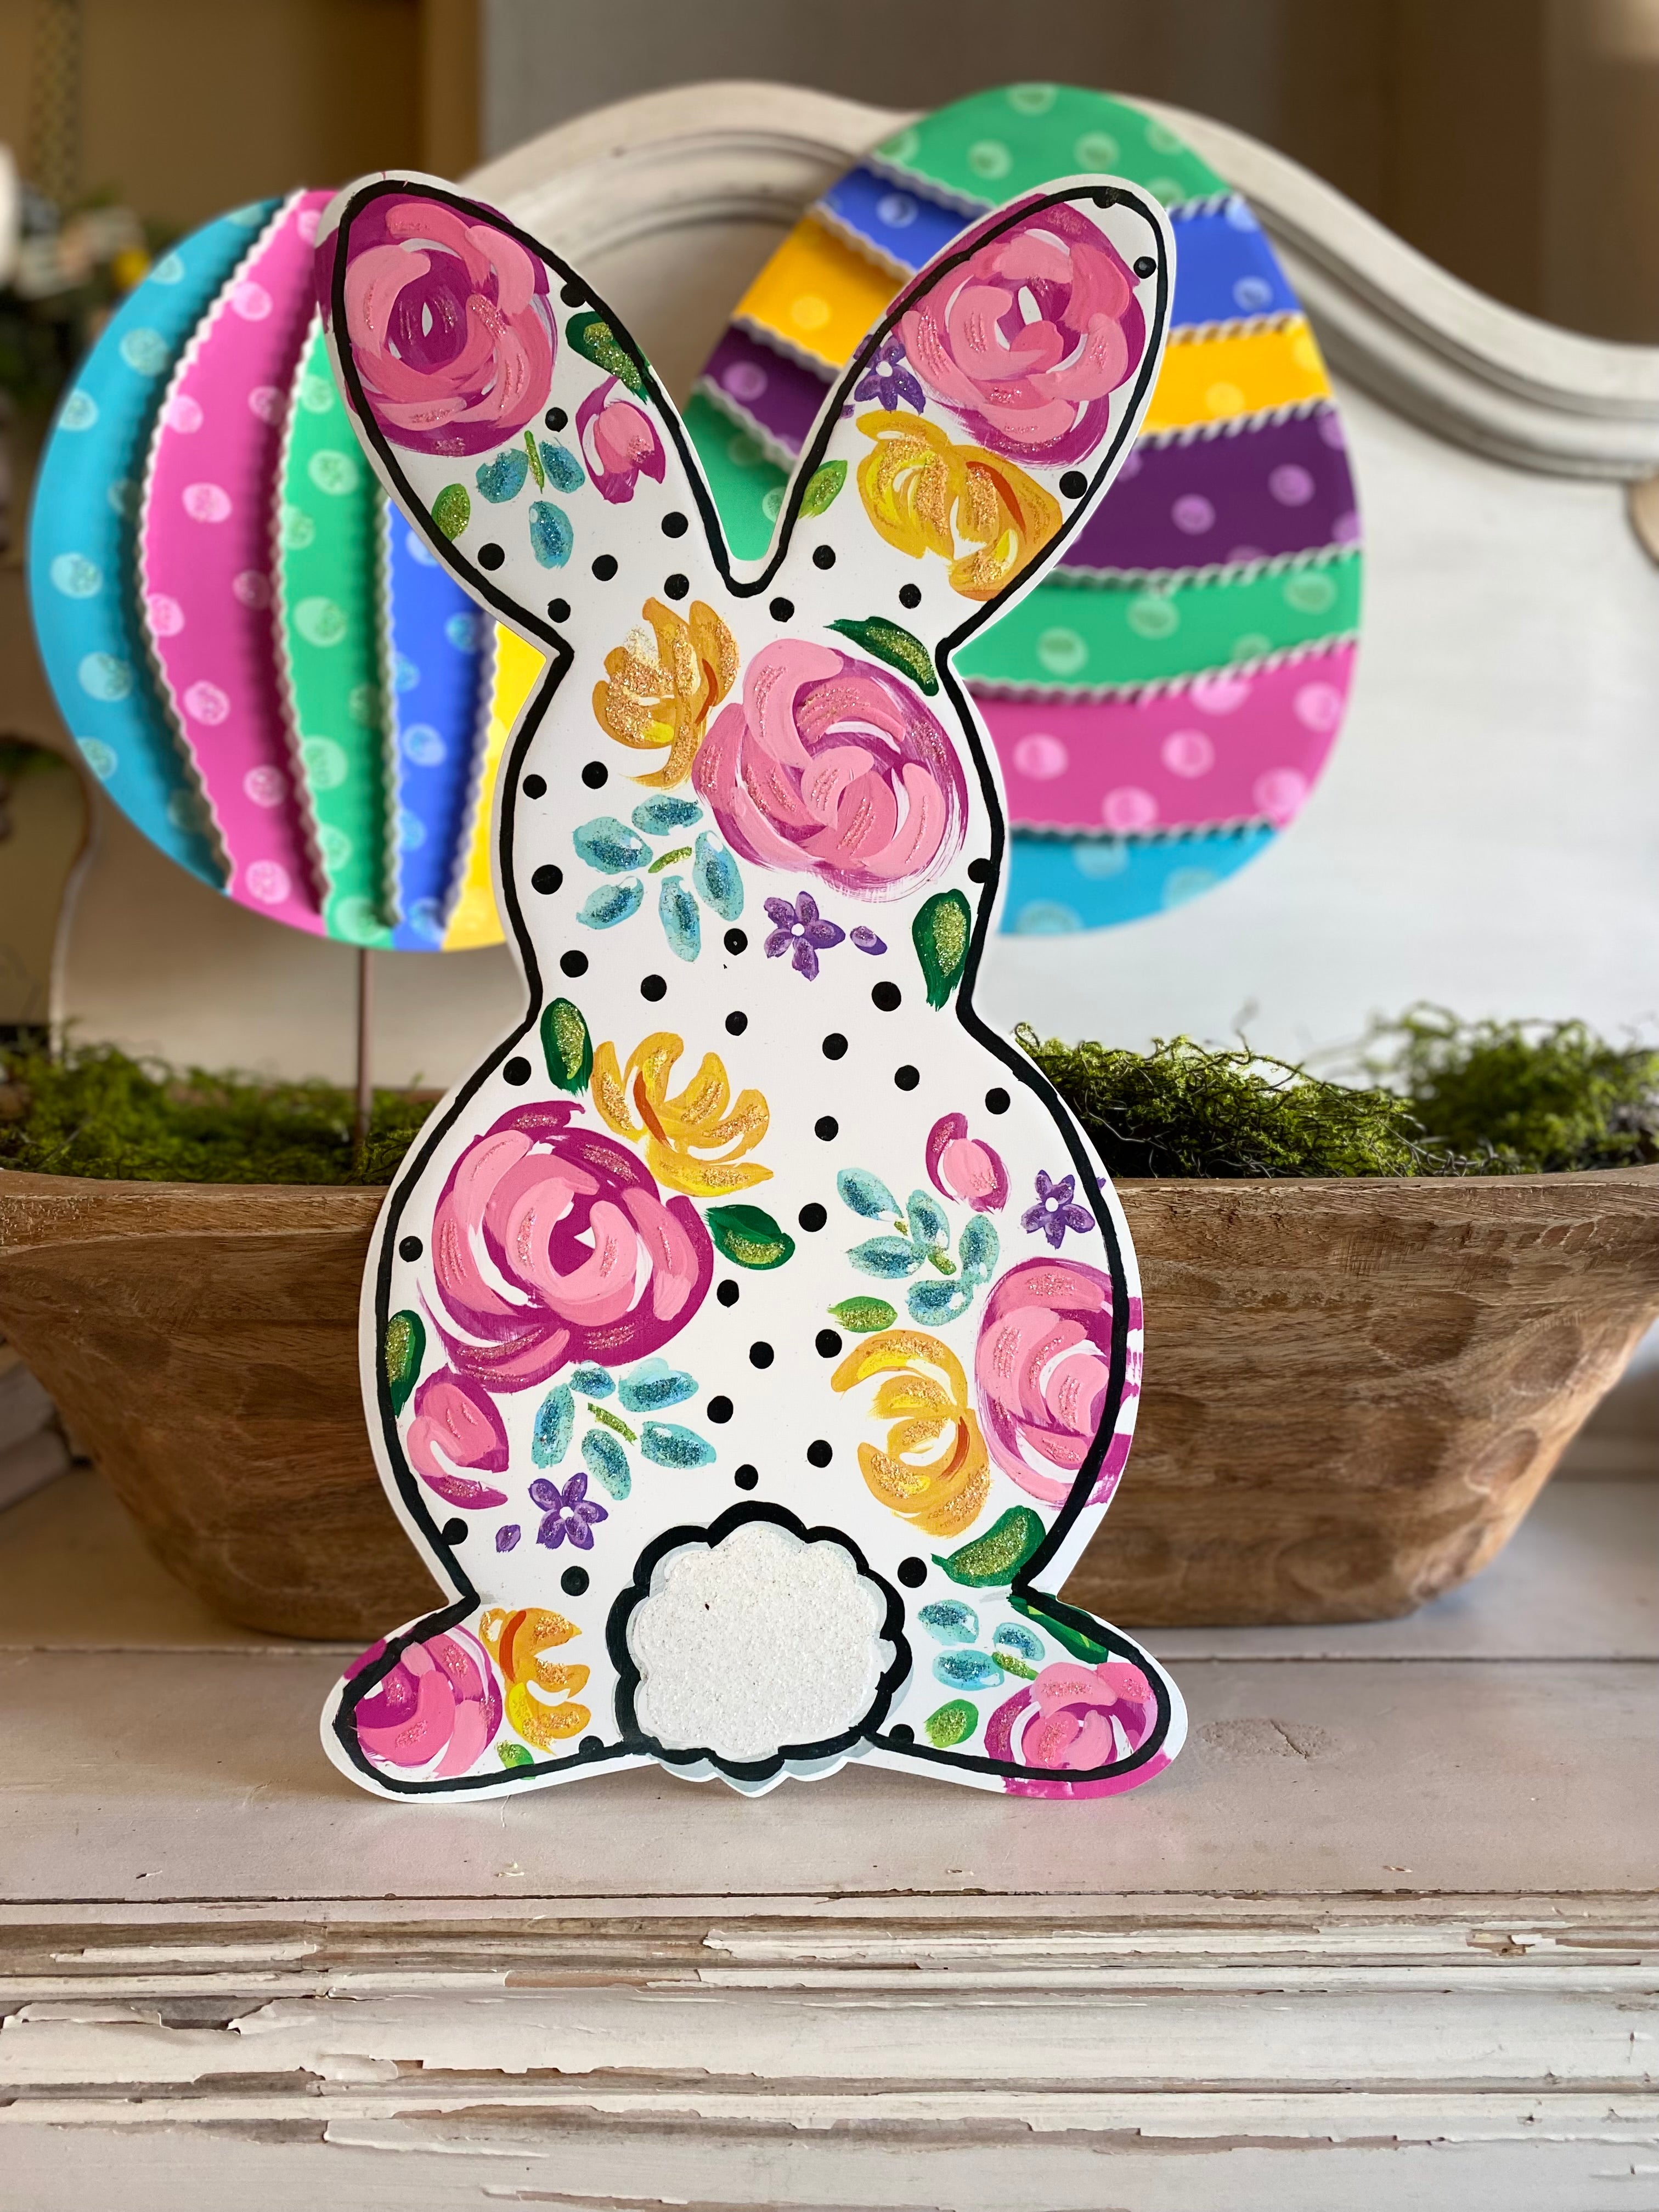 White Floral Rabbit Metal Door Hanger, Stake, and Attached Easel